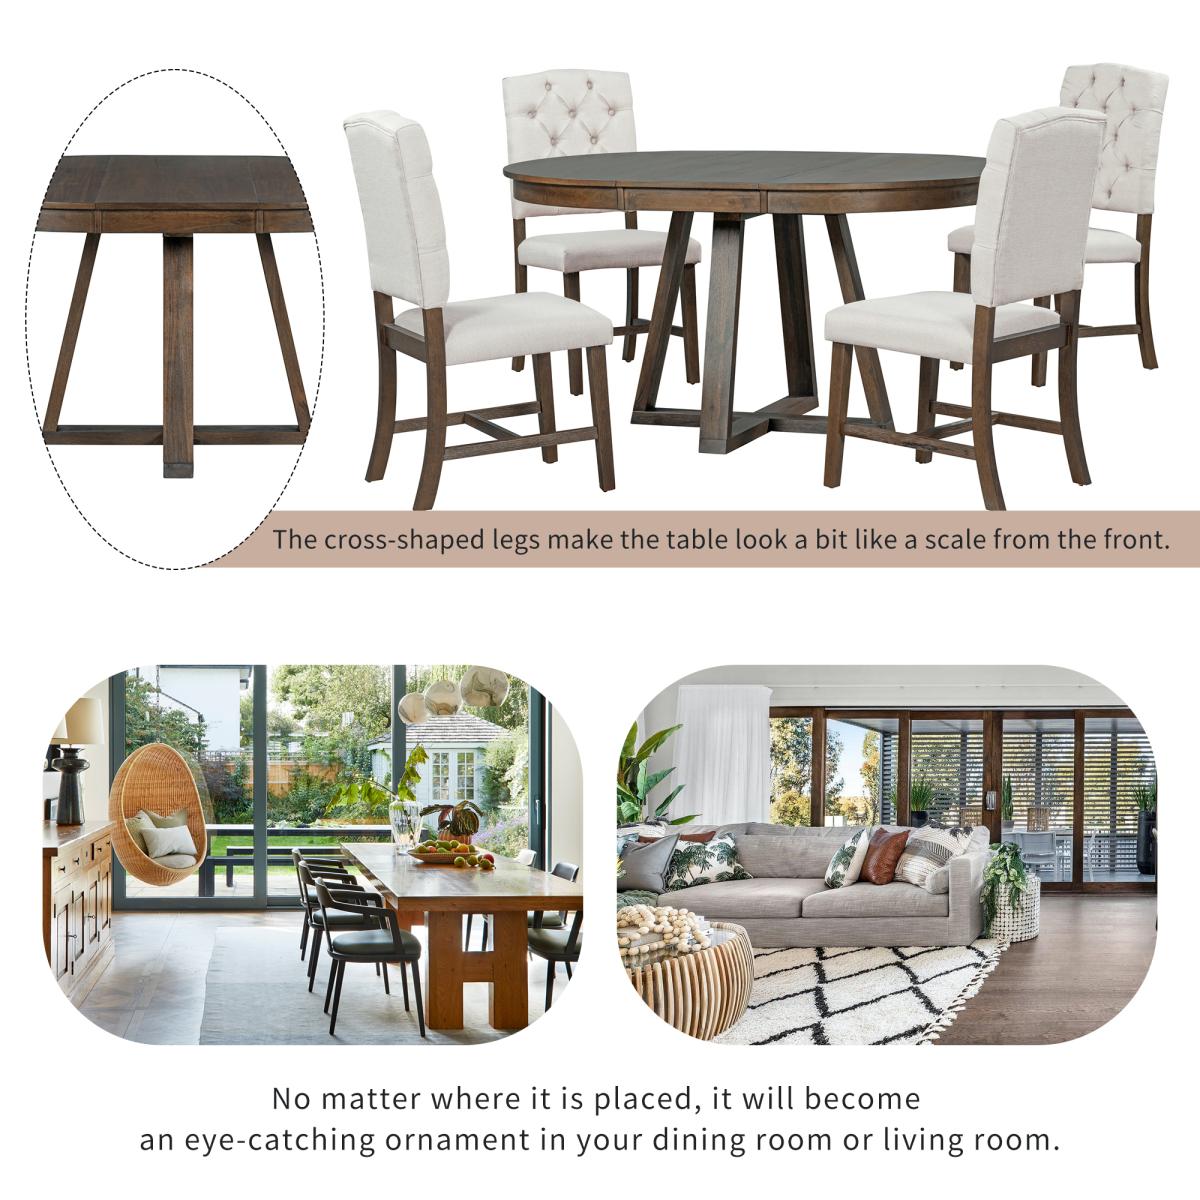 TREXM 5-Piece Retro Functional Dining Set, Round Table with a 16